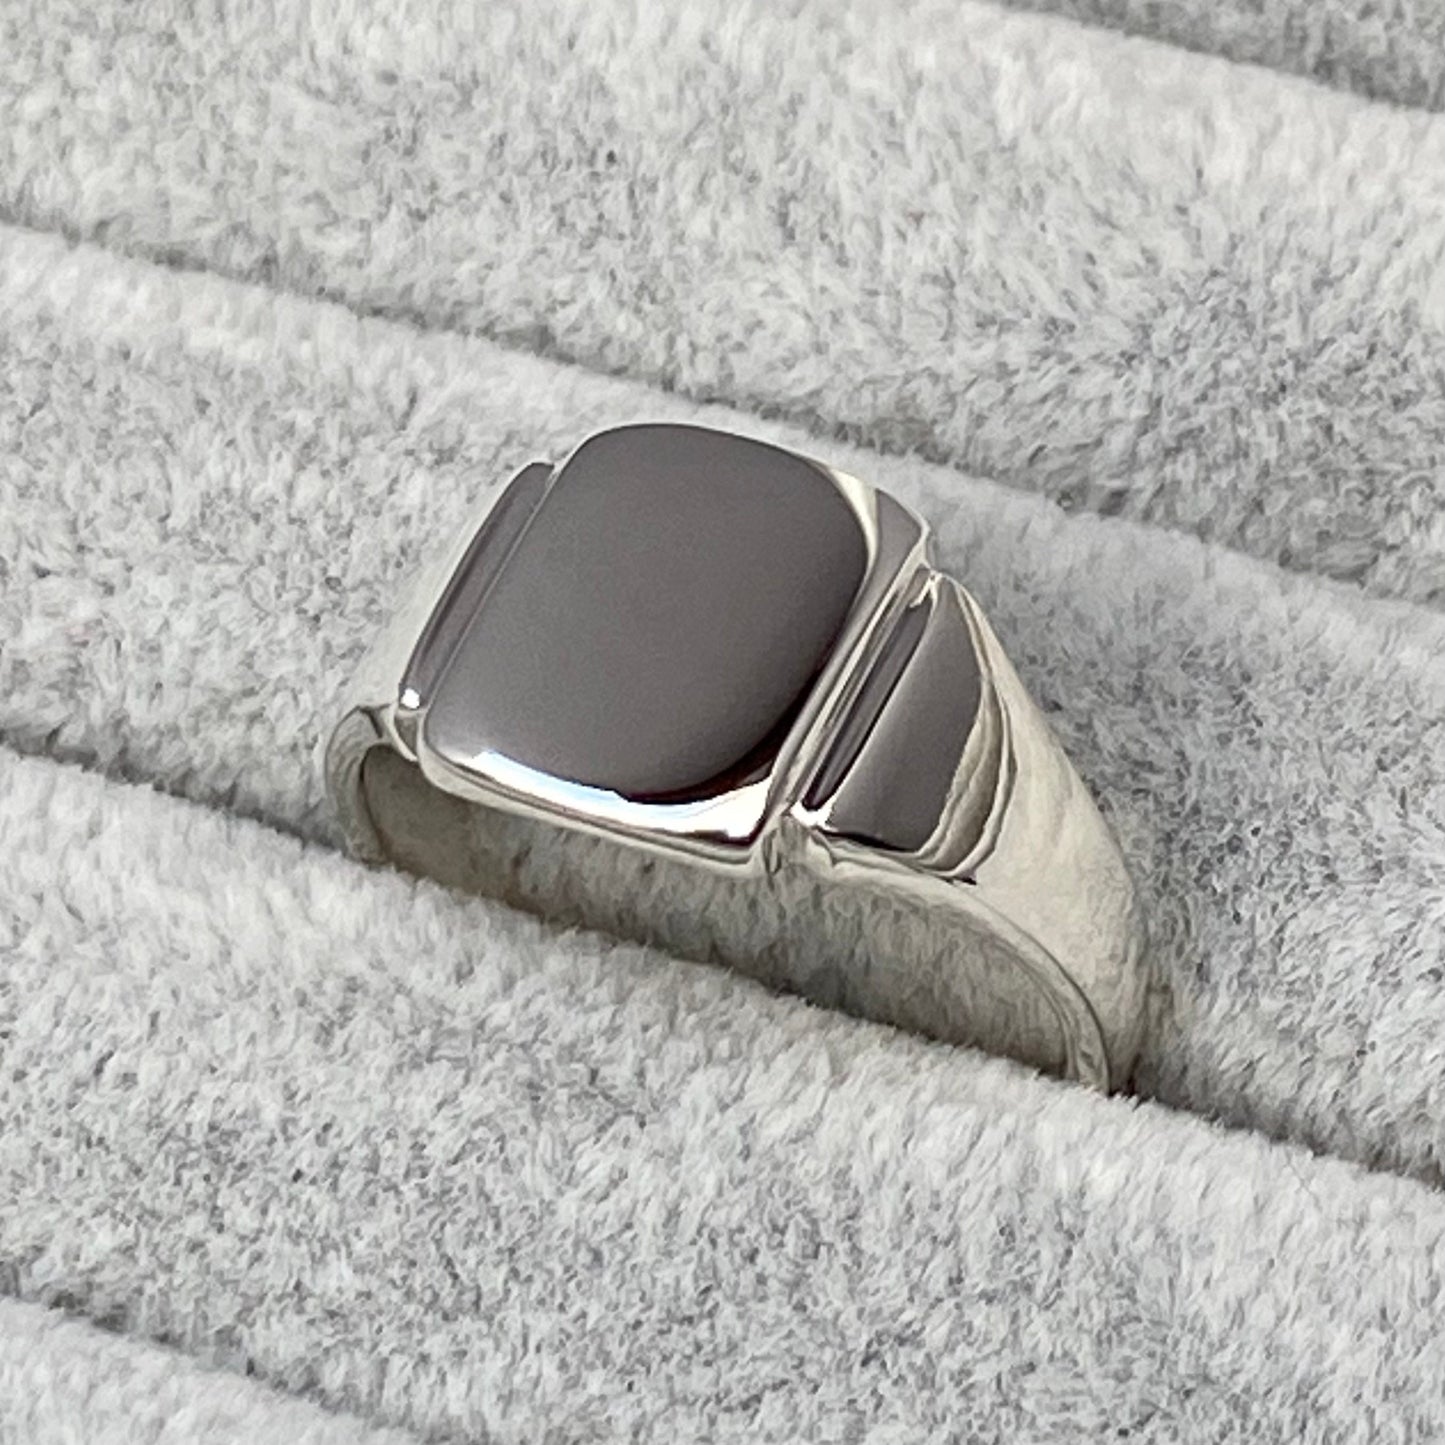 Handmade to order - Vintage inspired silver polished cushion signet ring